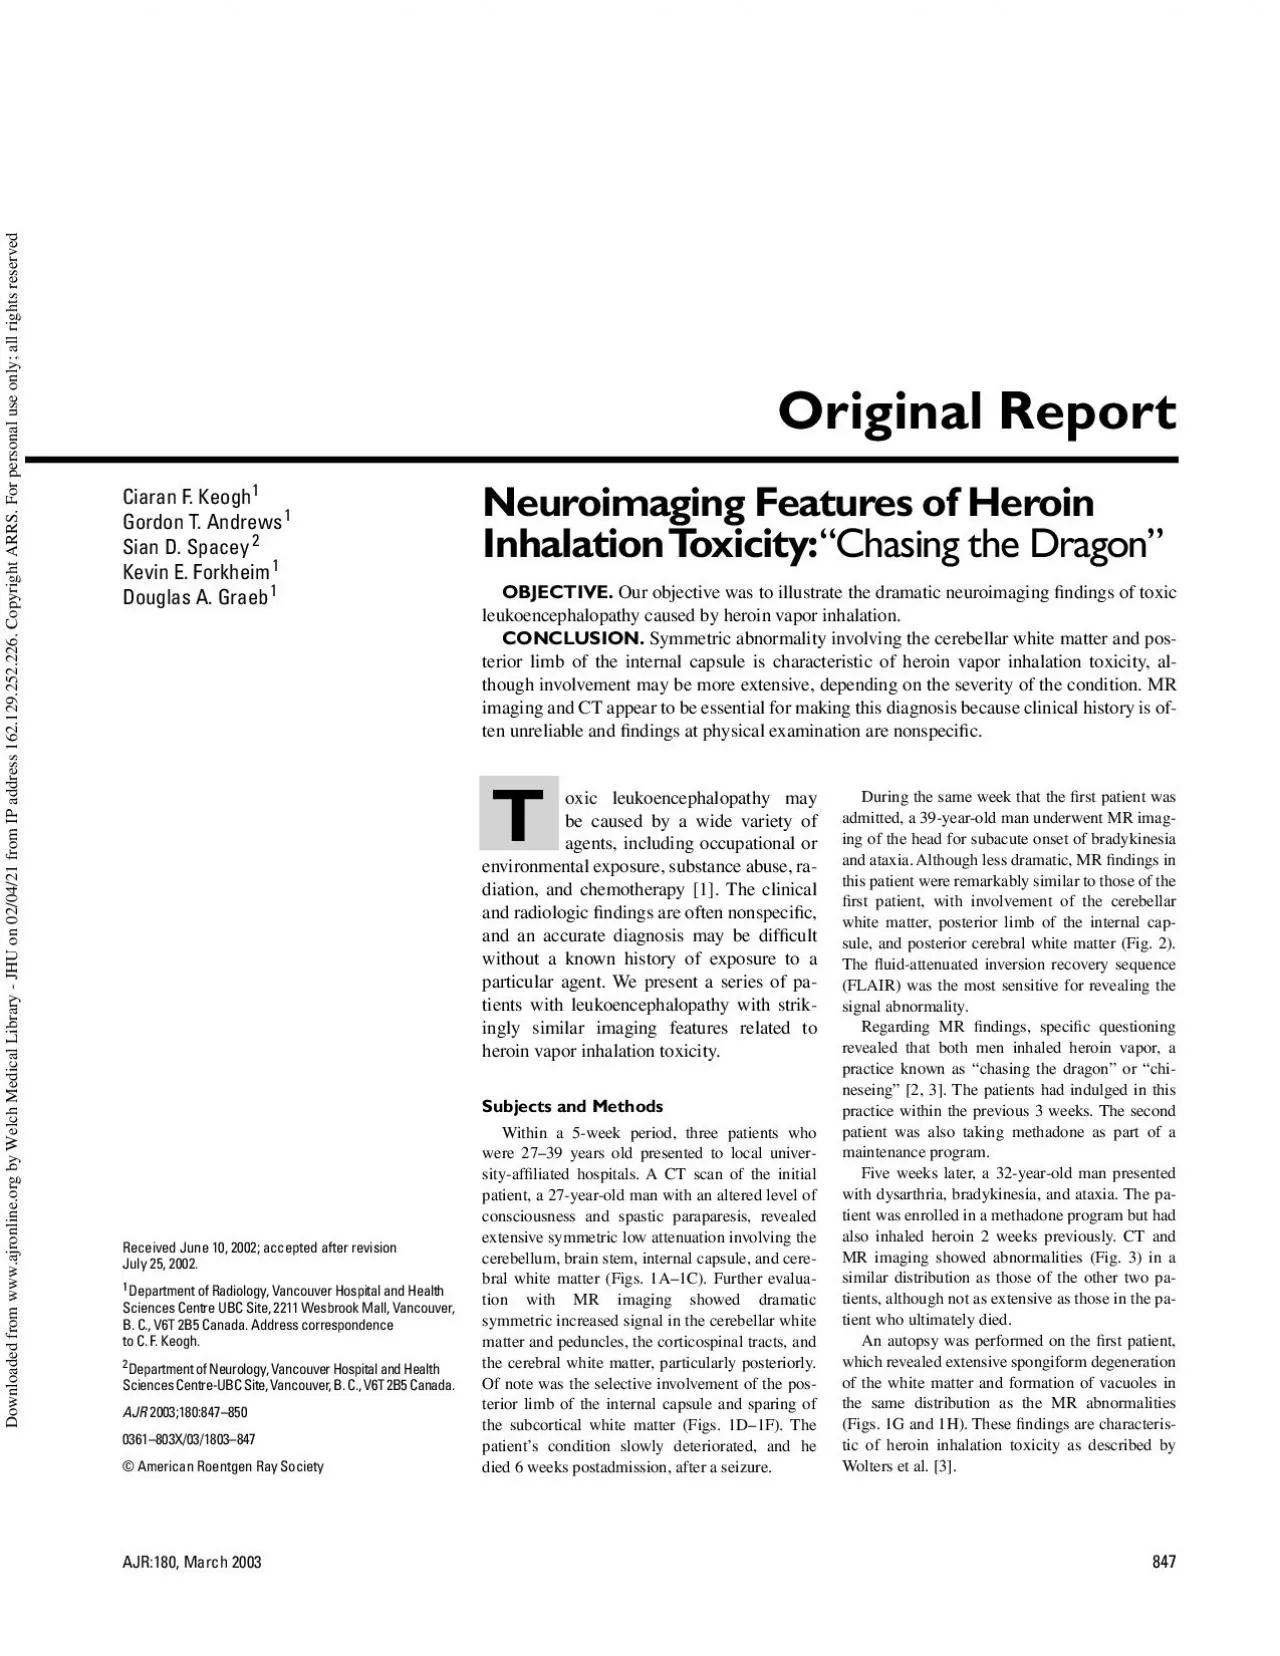 Original Report Our objective was to illustrate the dramatic neuroimag